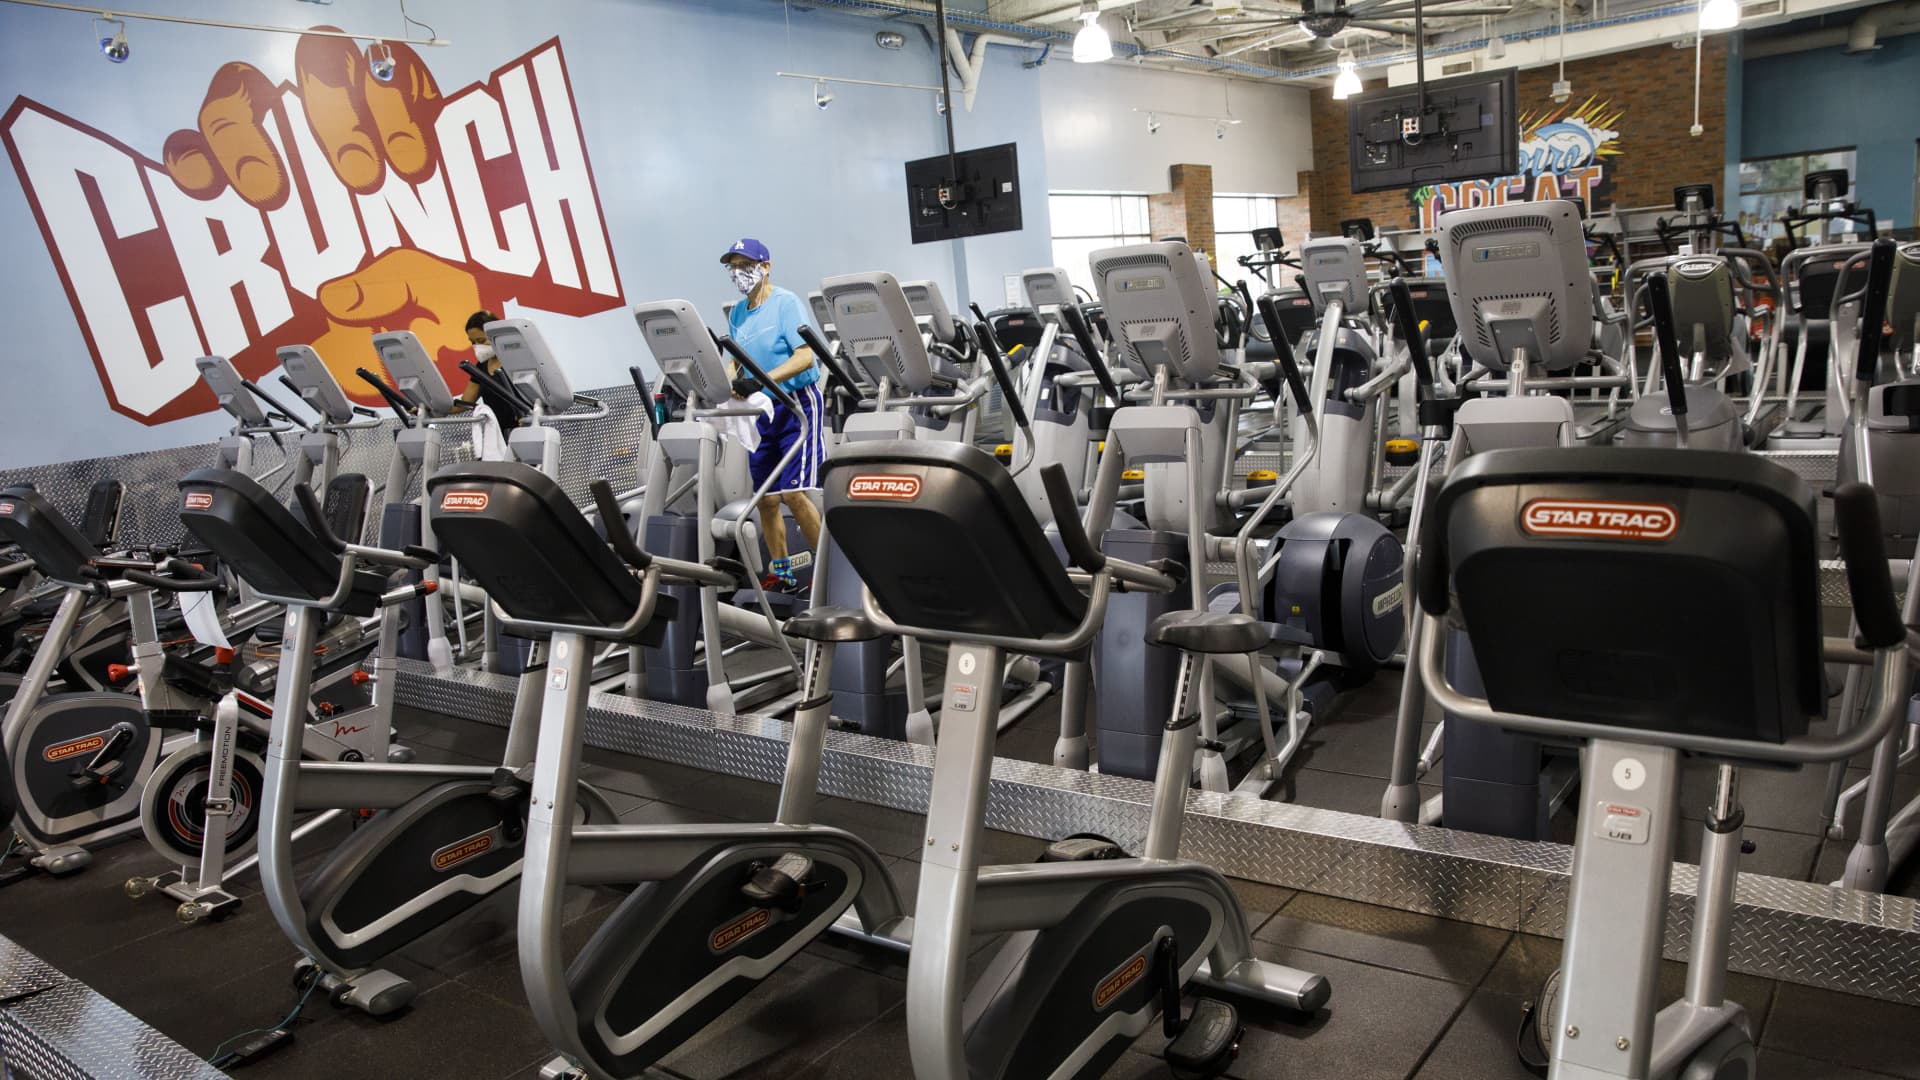 A person exercises on an elliptical machine at a Crunch Fitness gym location in Burbank, California, U.S., on Tuesday, June 23, 2020.